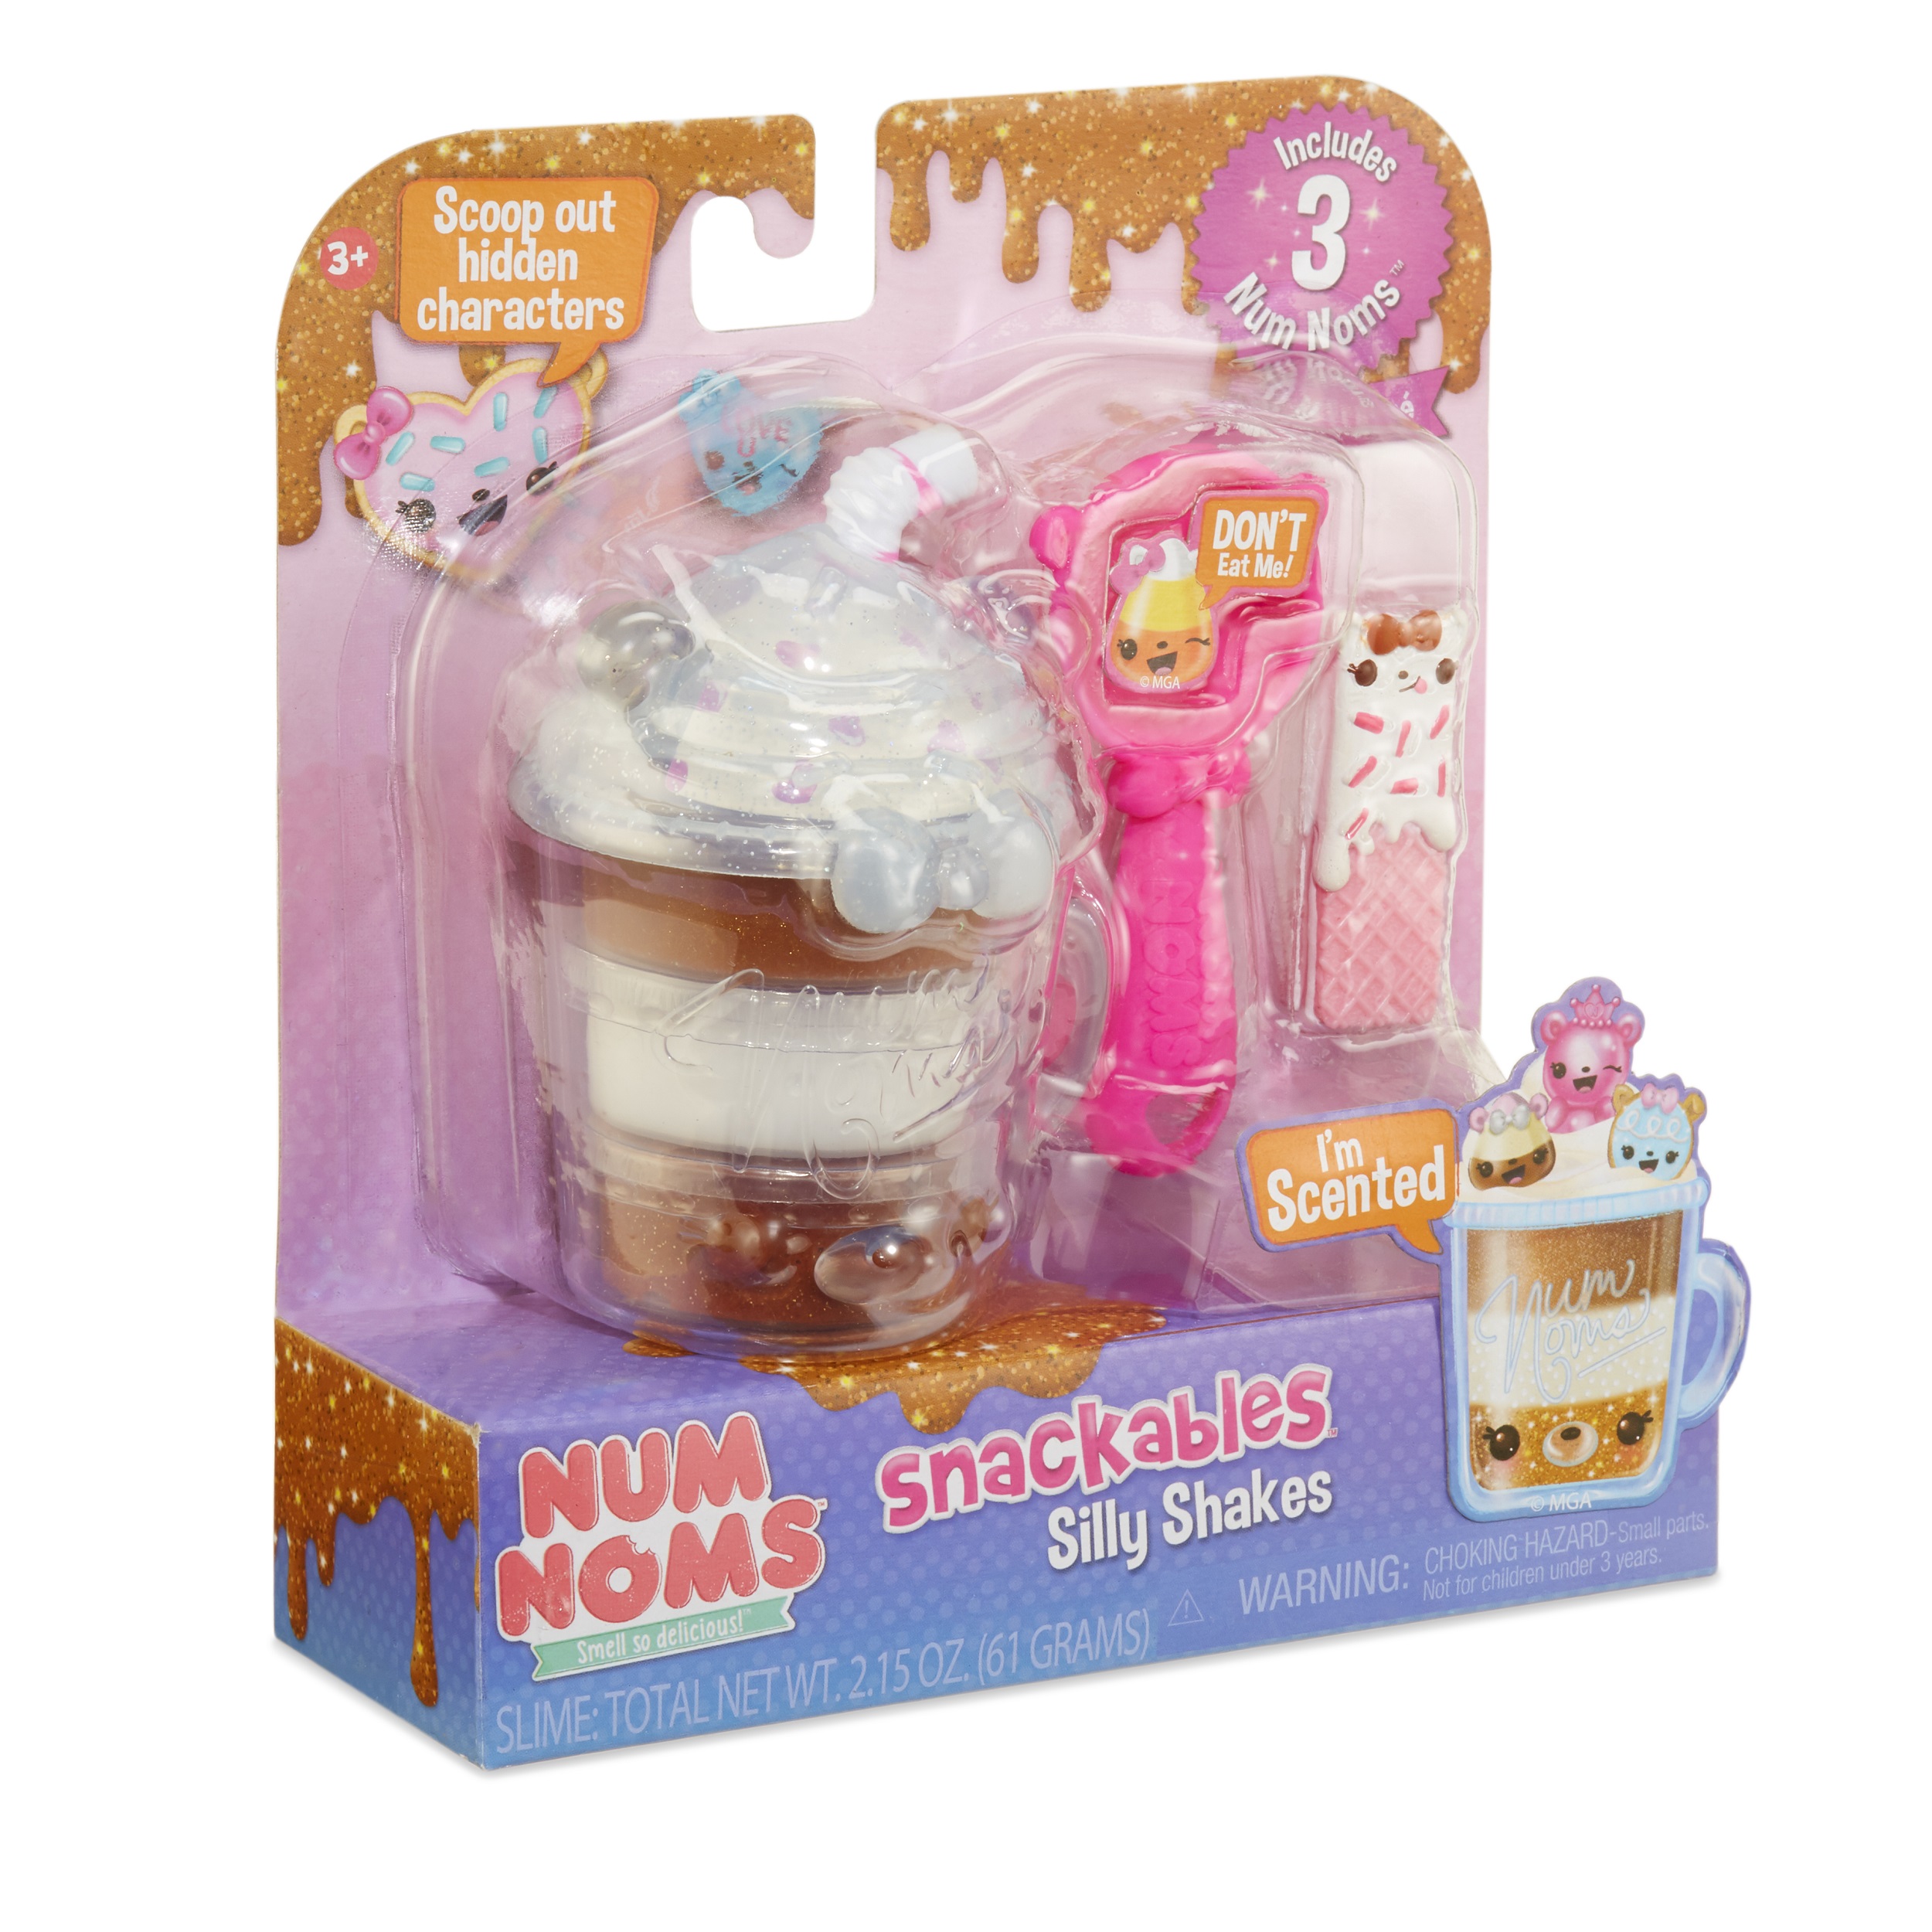 Num Noms Snackables Silly Shakes- S'Mores Frappe - image 5 of 6